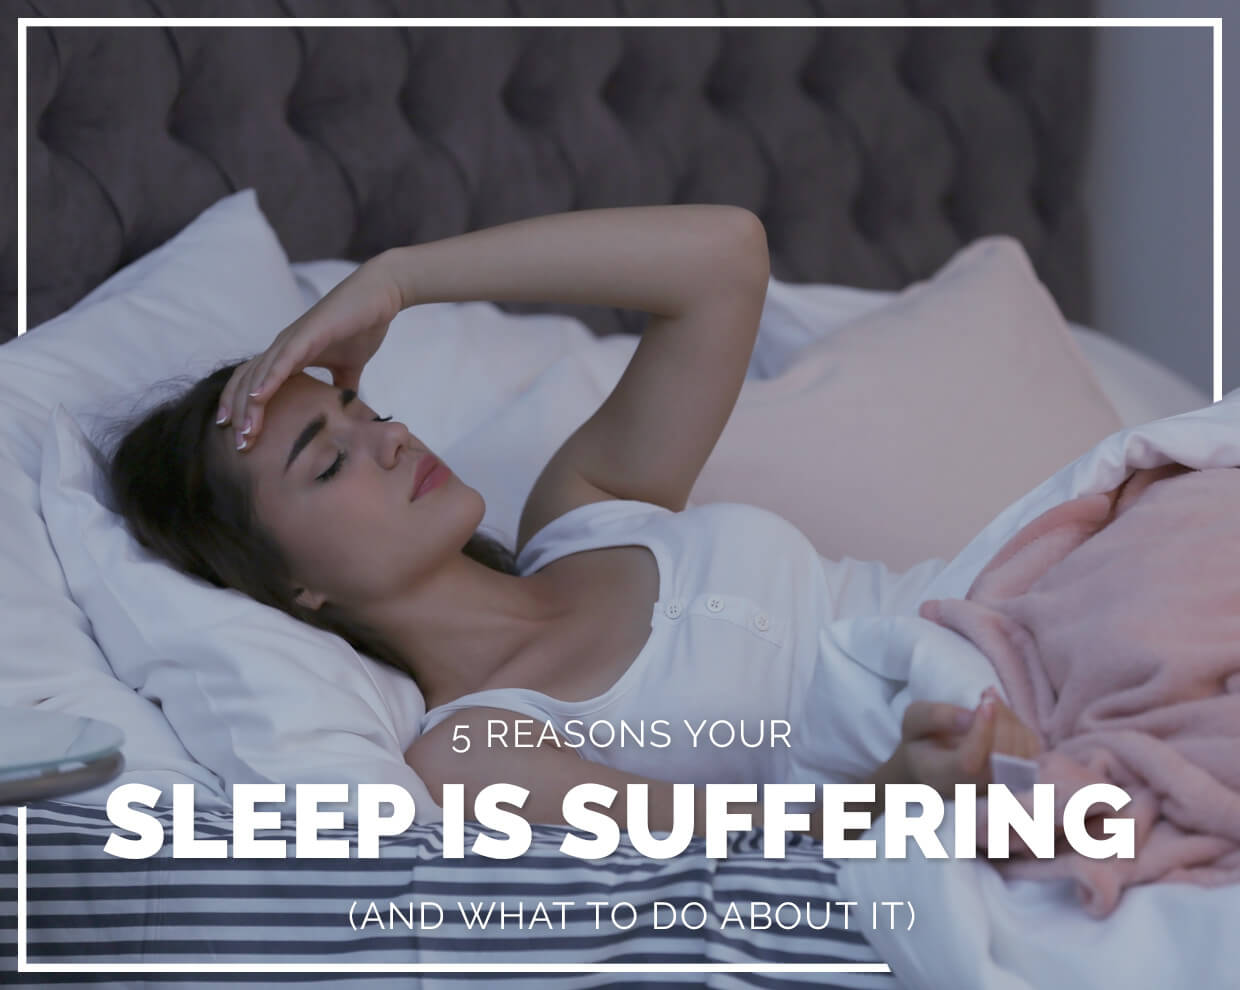 5 reasons your sleep is suffering (and what to do about it) 